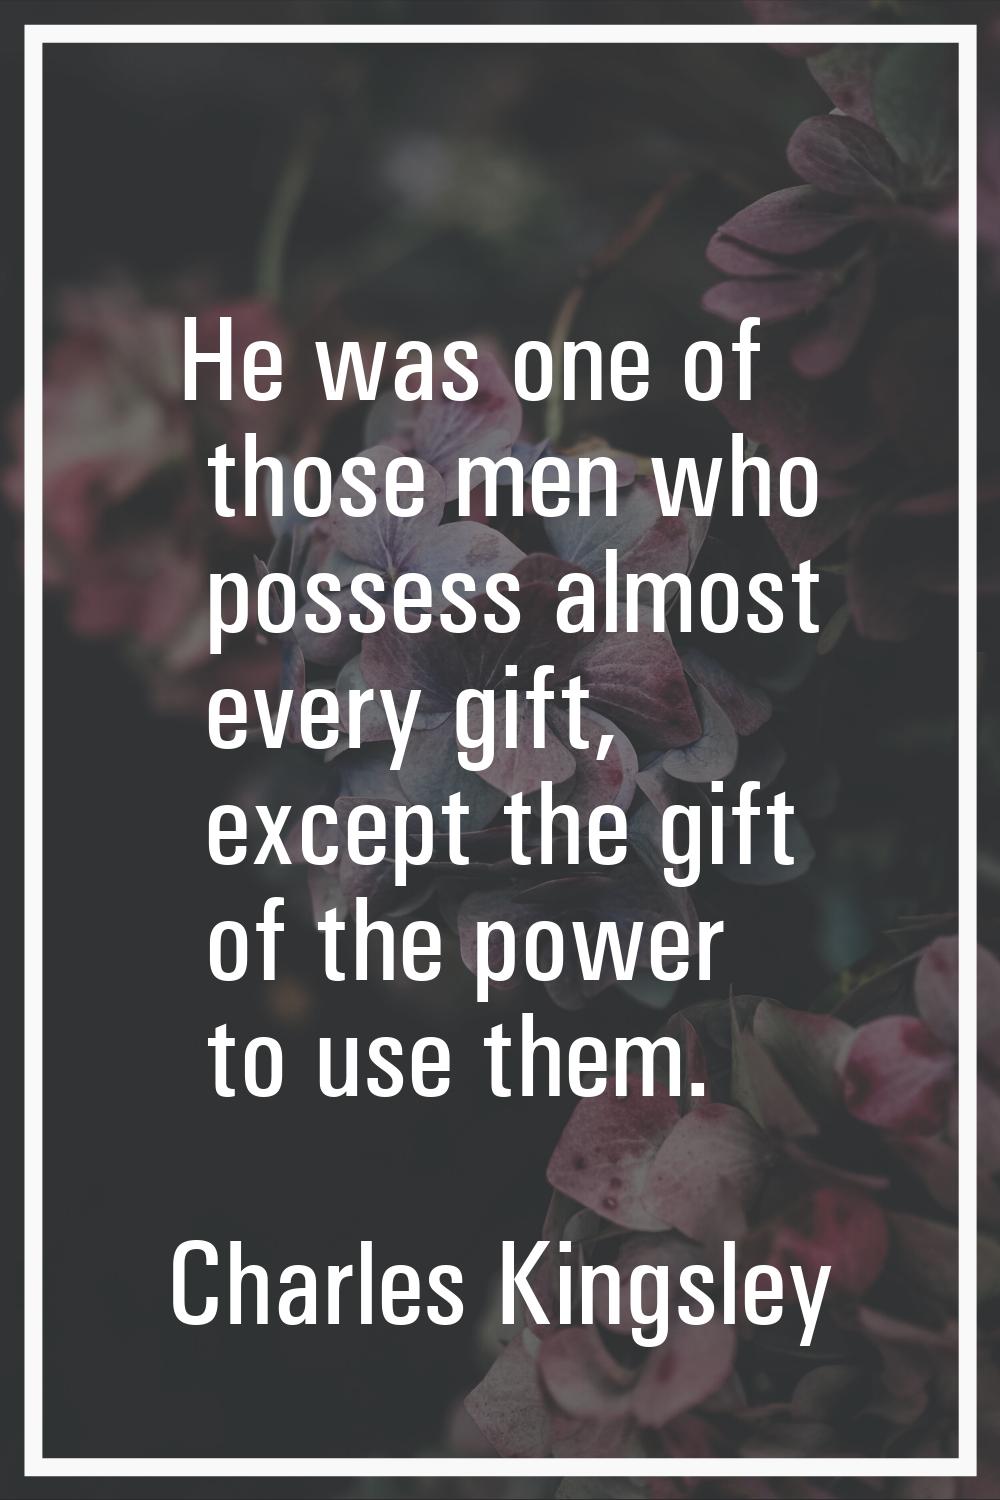 He was one of those men who possess almost every gift, except the gift of the power to use them.